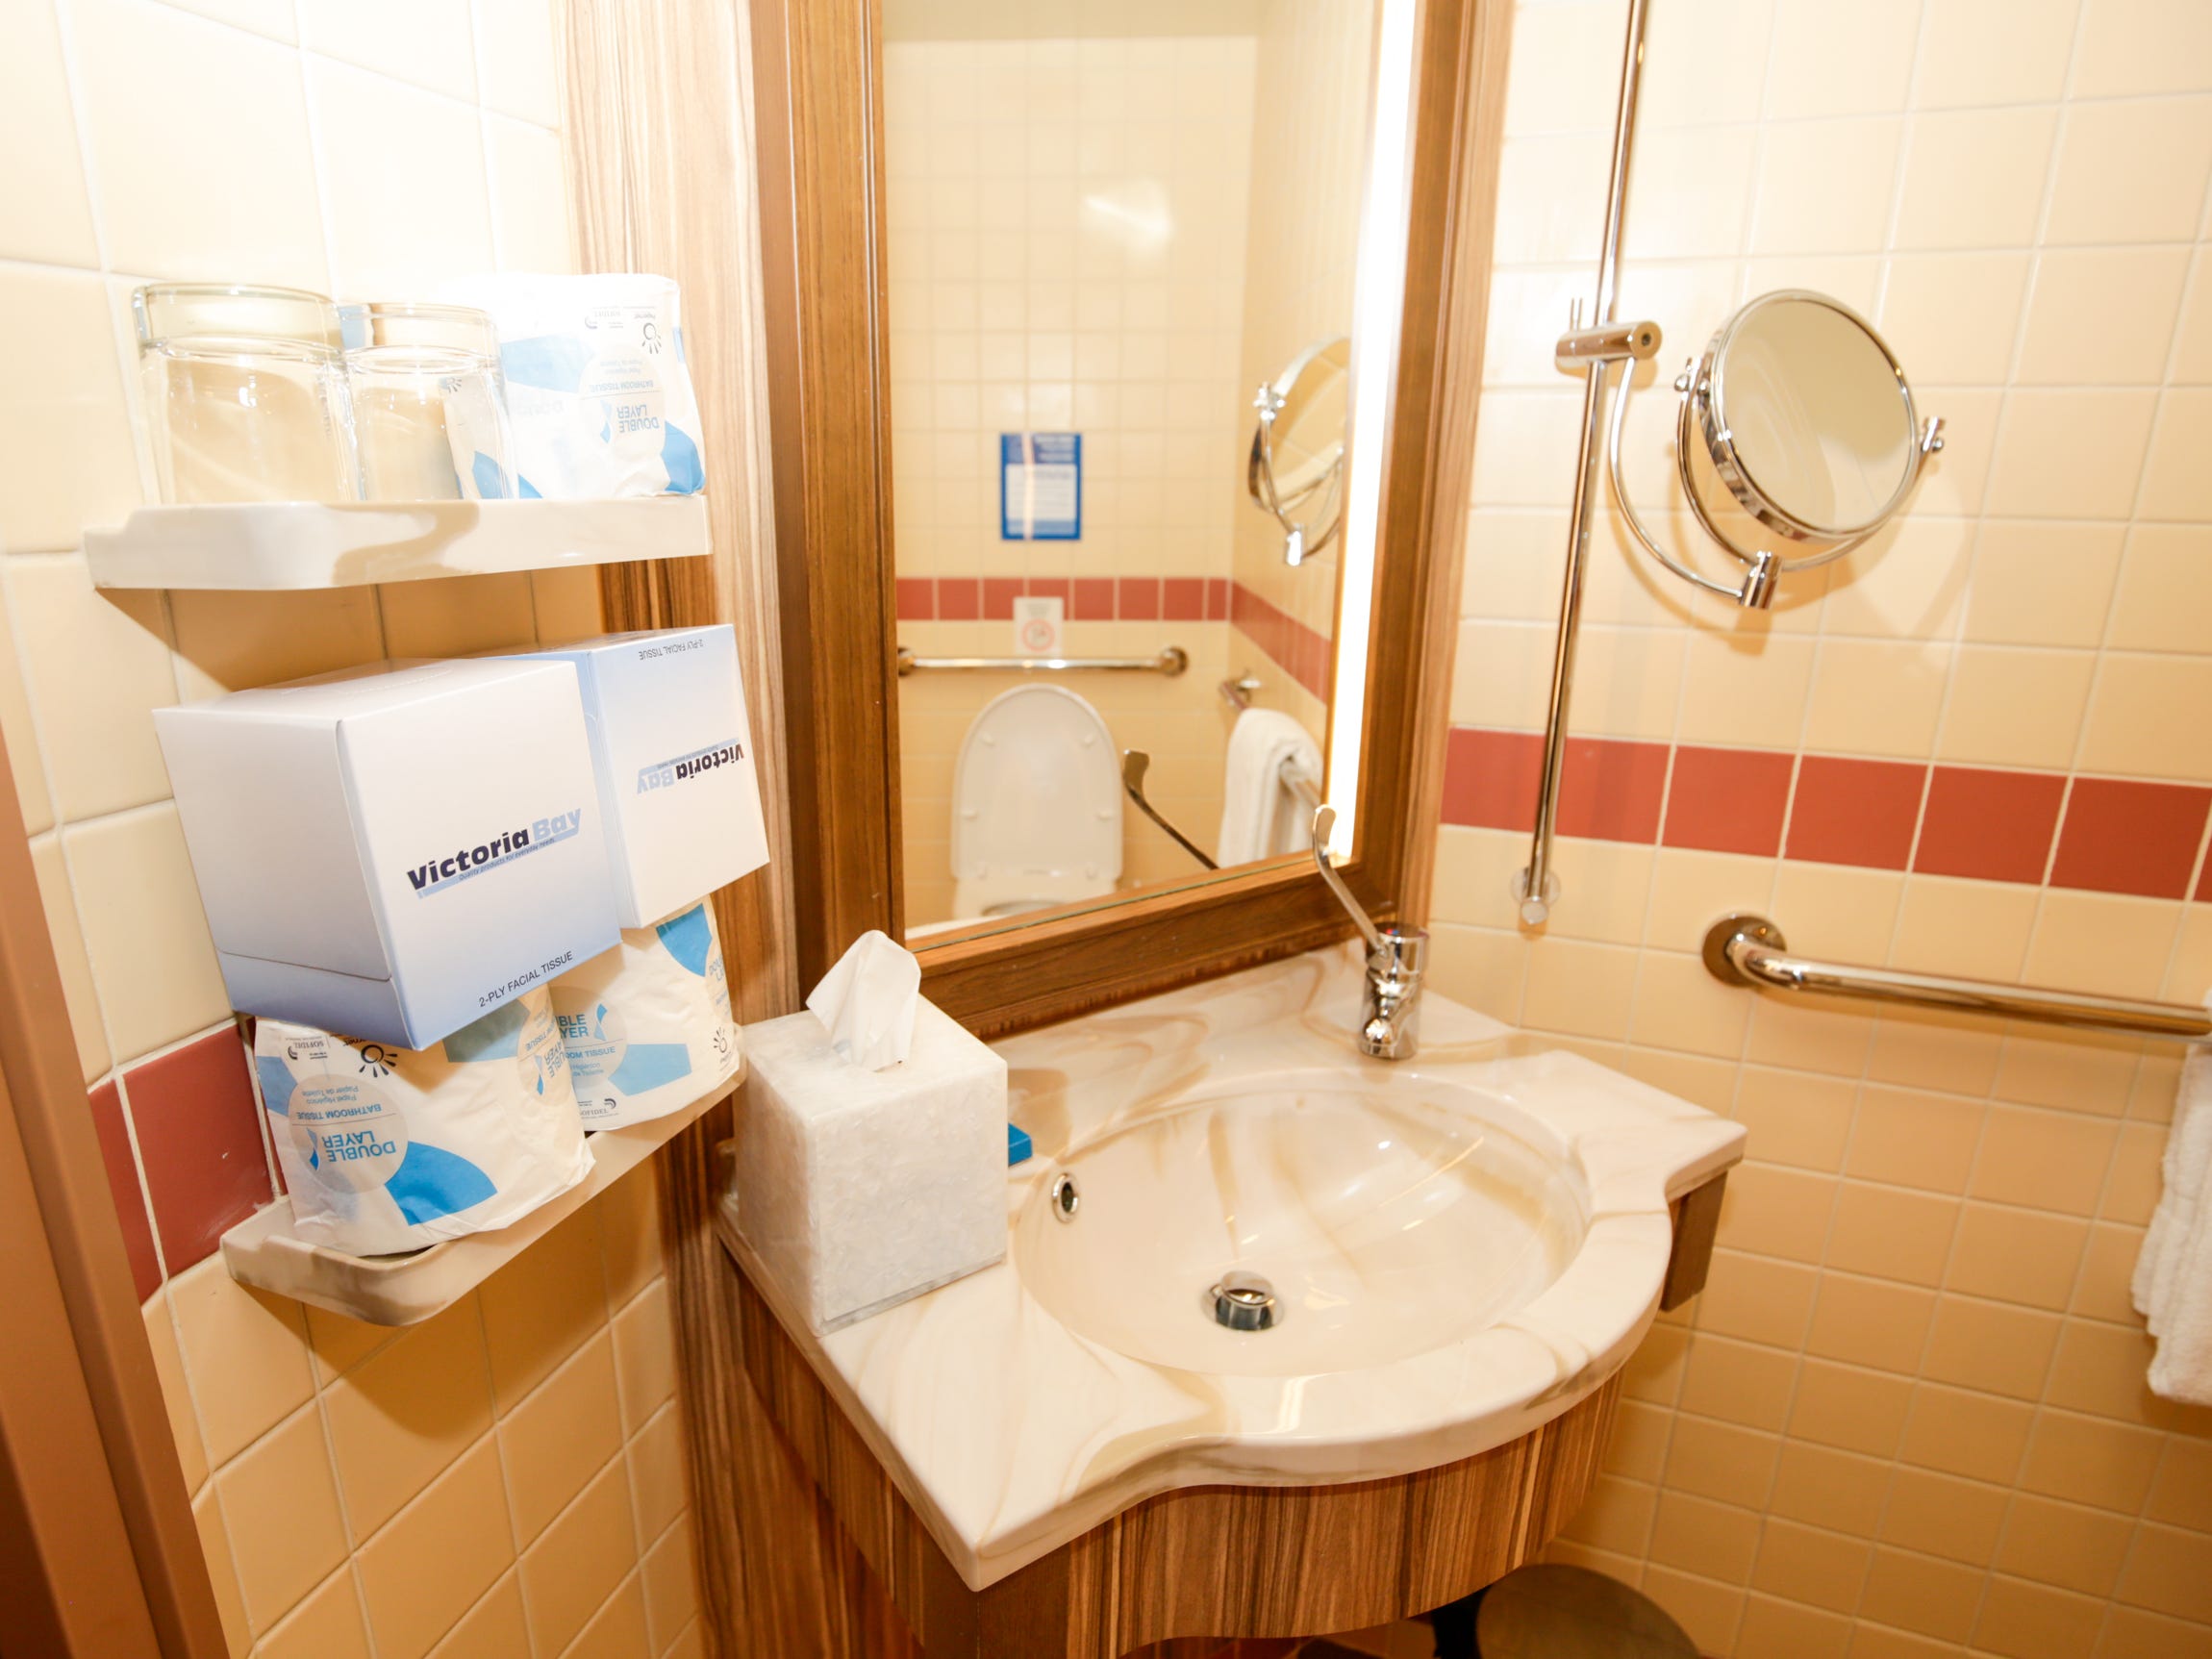 <p>An unnecessary number of stacked tissue boxes and toilet paper rolls occupied the only shelves in the bathroom.</p><p>There was no need for these excess paper products. My cabin attendant already cleaned and restocked my stateroom once a day, as is typical with Carnival.</p><p>I'm a girlie with an extensive skincare routine and a compulsive need to organize my products. With almost no storage in the bathroom, I needed these shelves.</p>